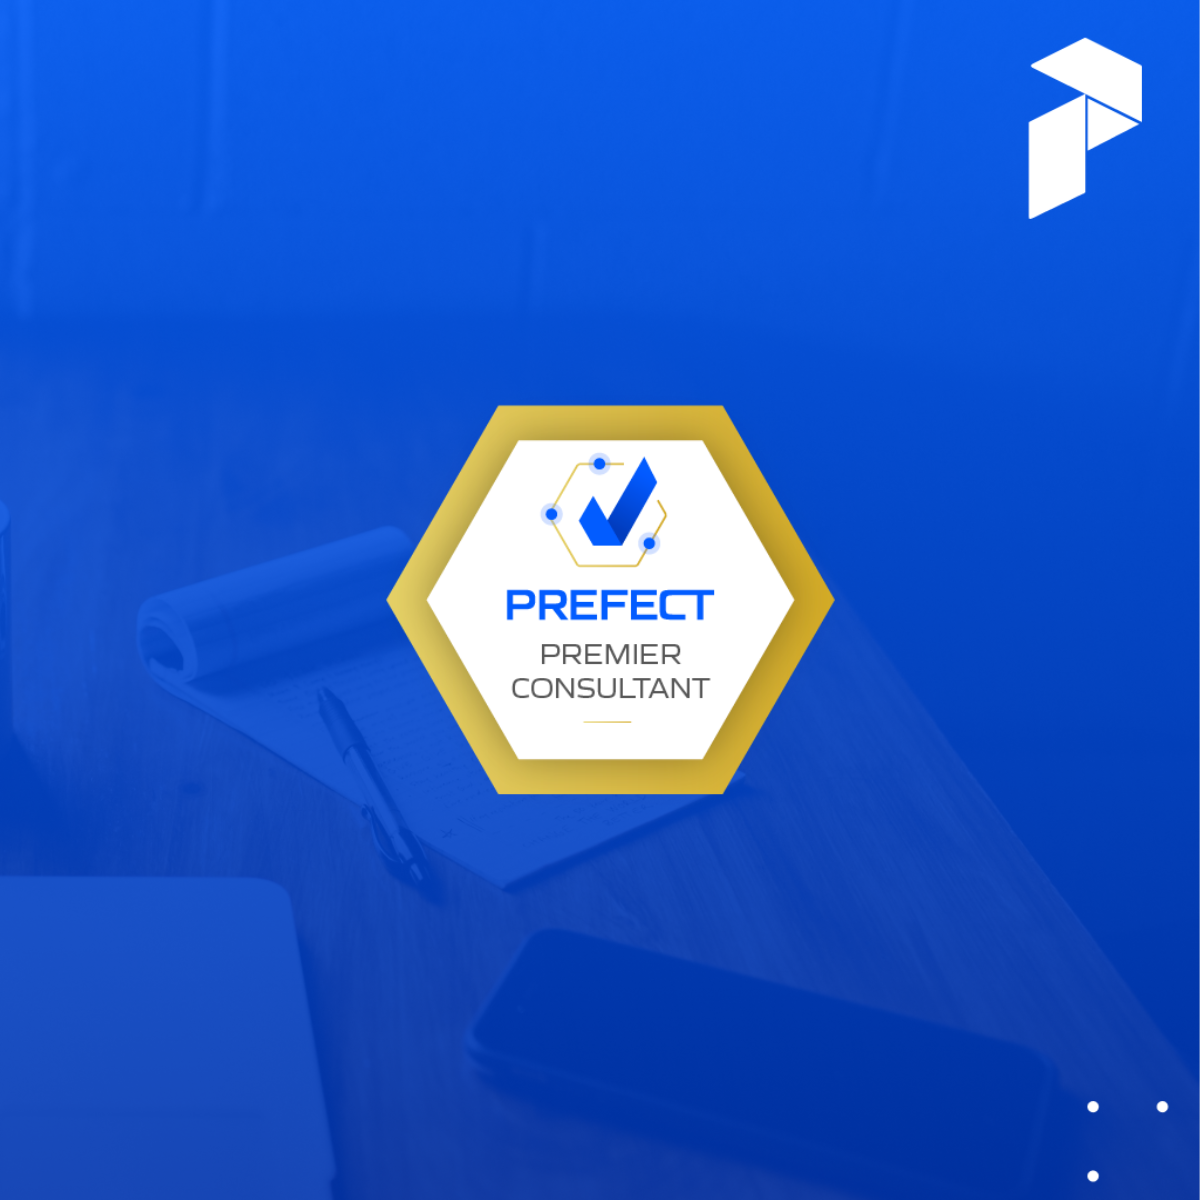 Prefect Launches its Premier Consulting Program